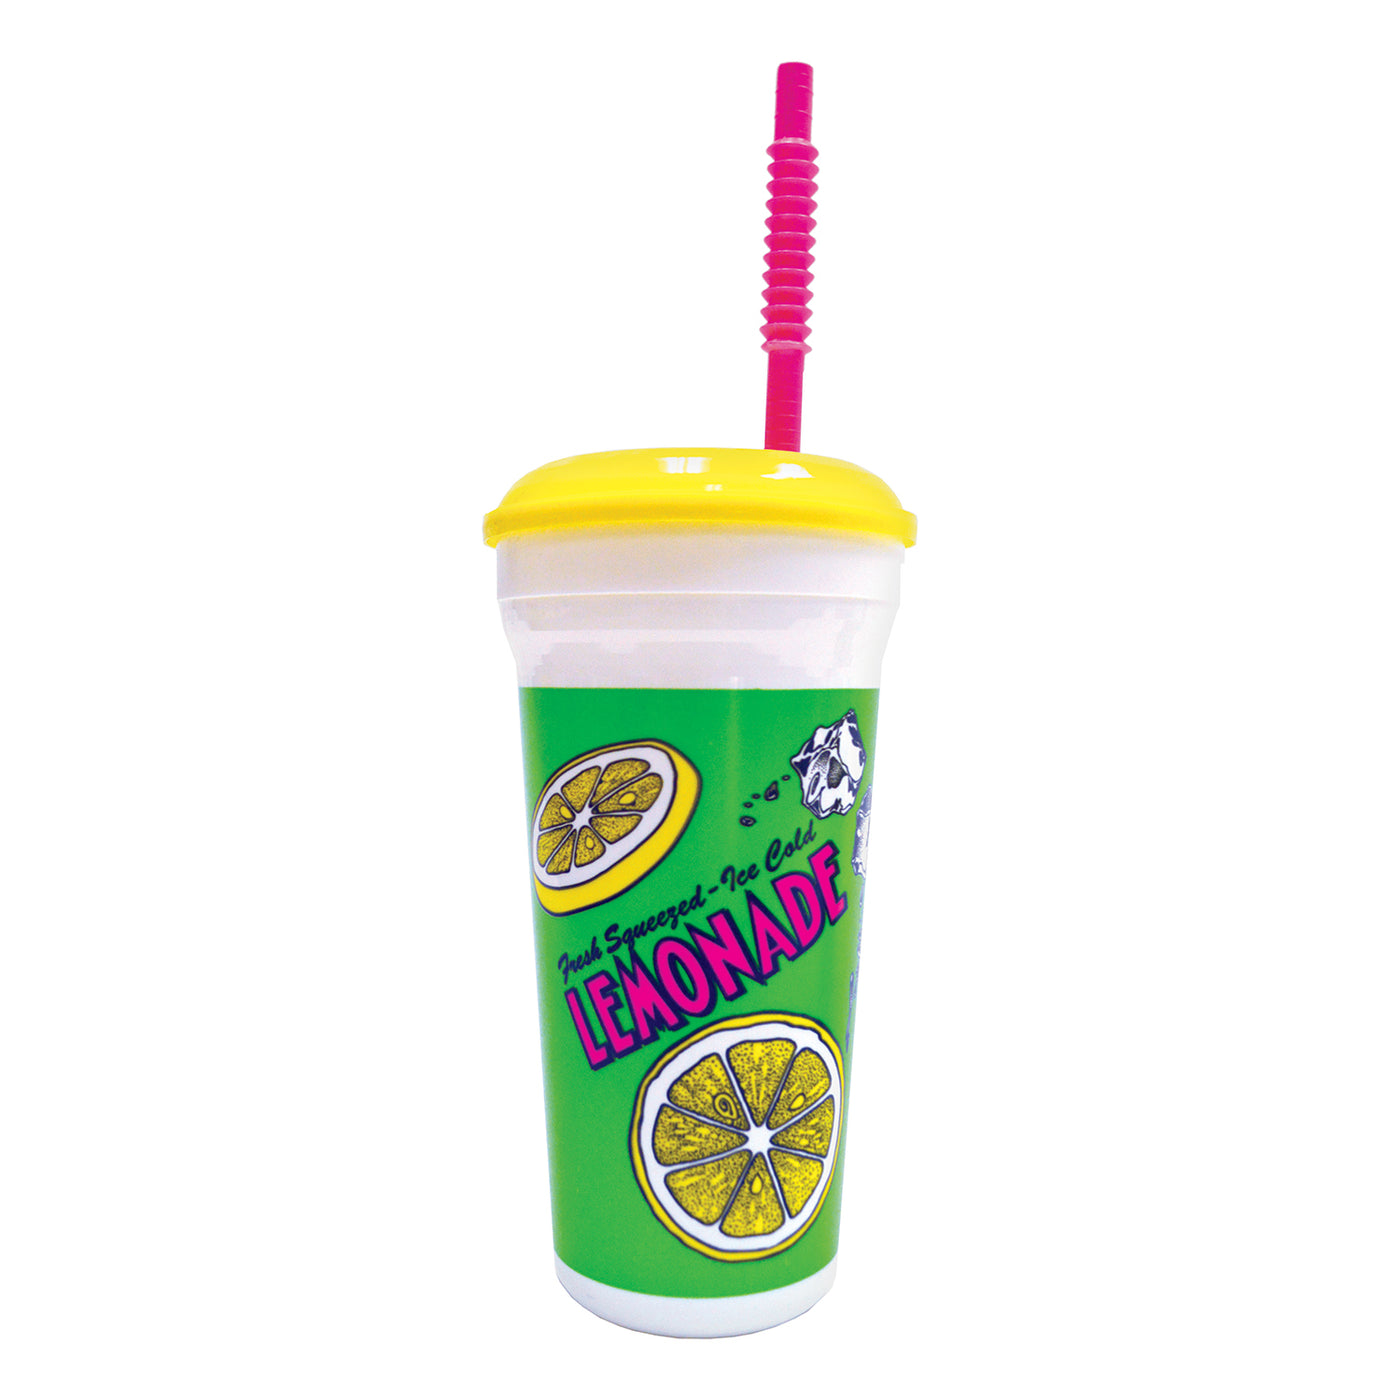 32 oz. Styrofoam Cup - 500 pack of Cups